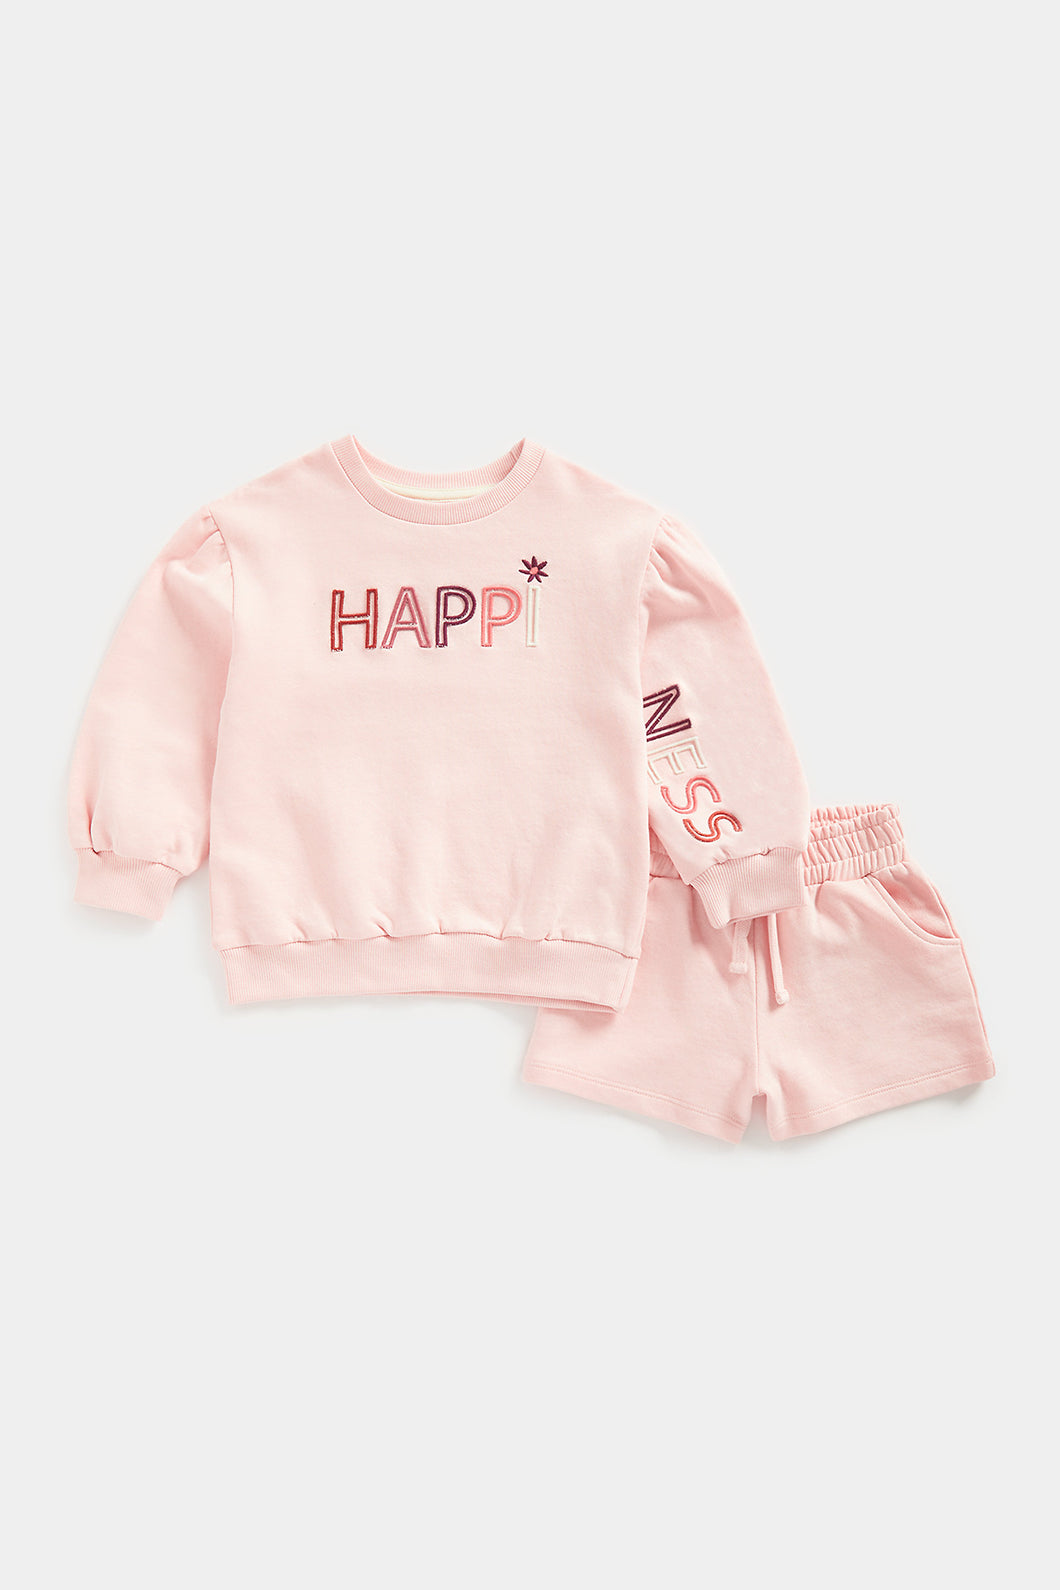 Mothercare Pink Sweat Top and Shorts Set